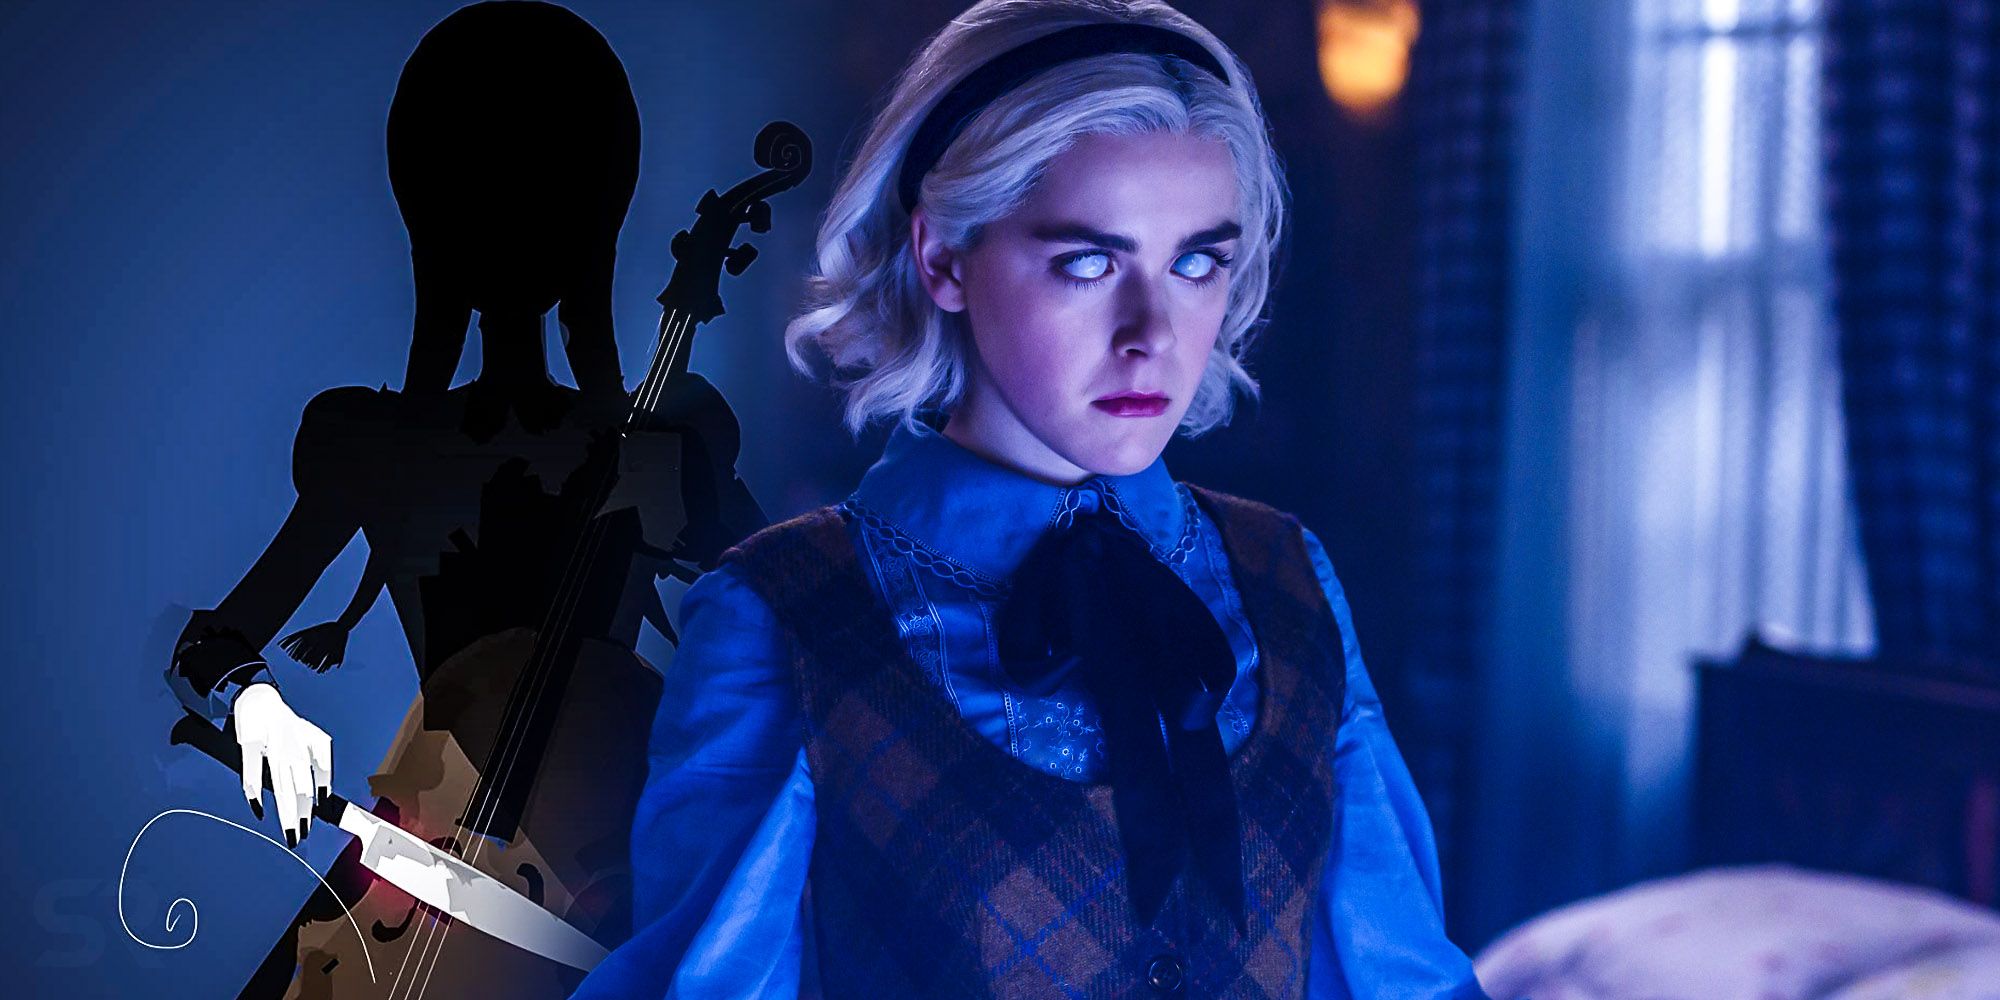 Netflix Wednesday Addams Show Must Avoid A Netflix Mistake chilling adventures of Sabrina